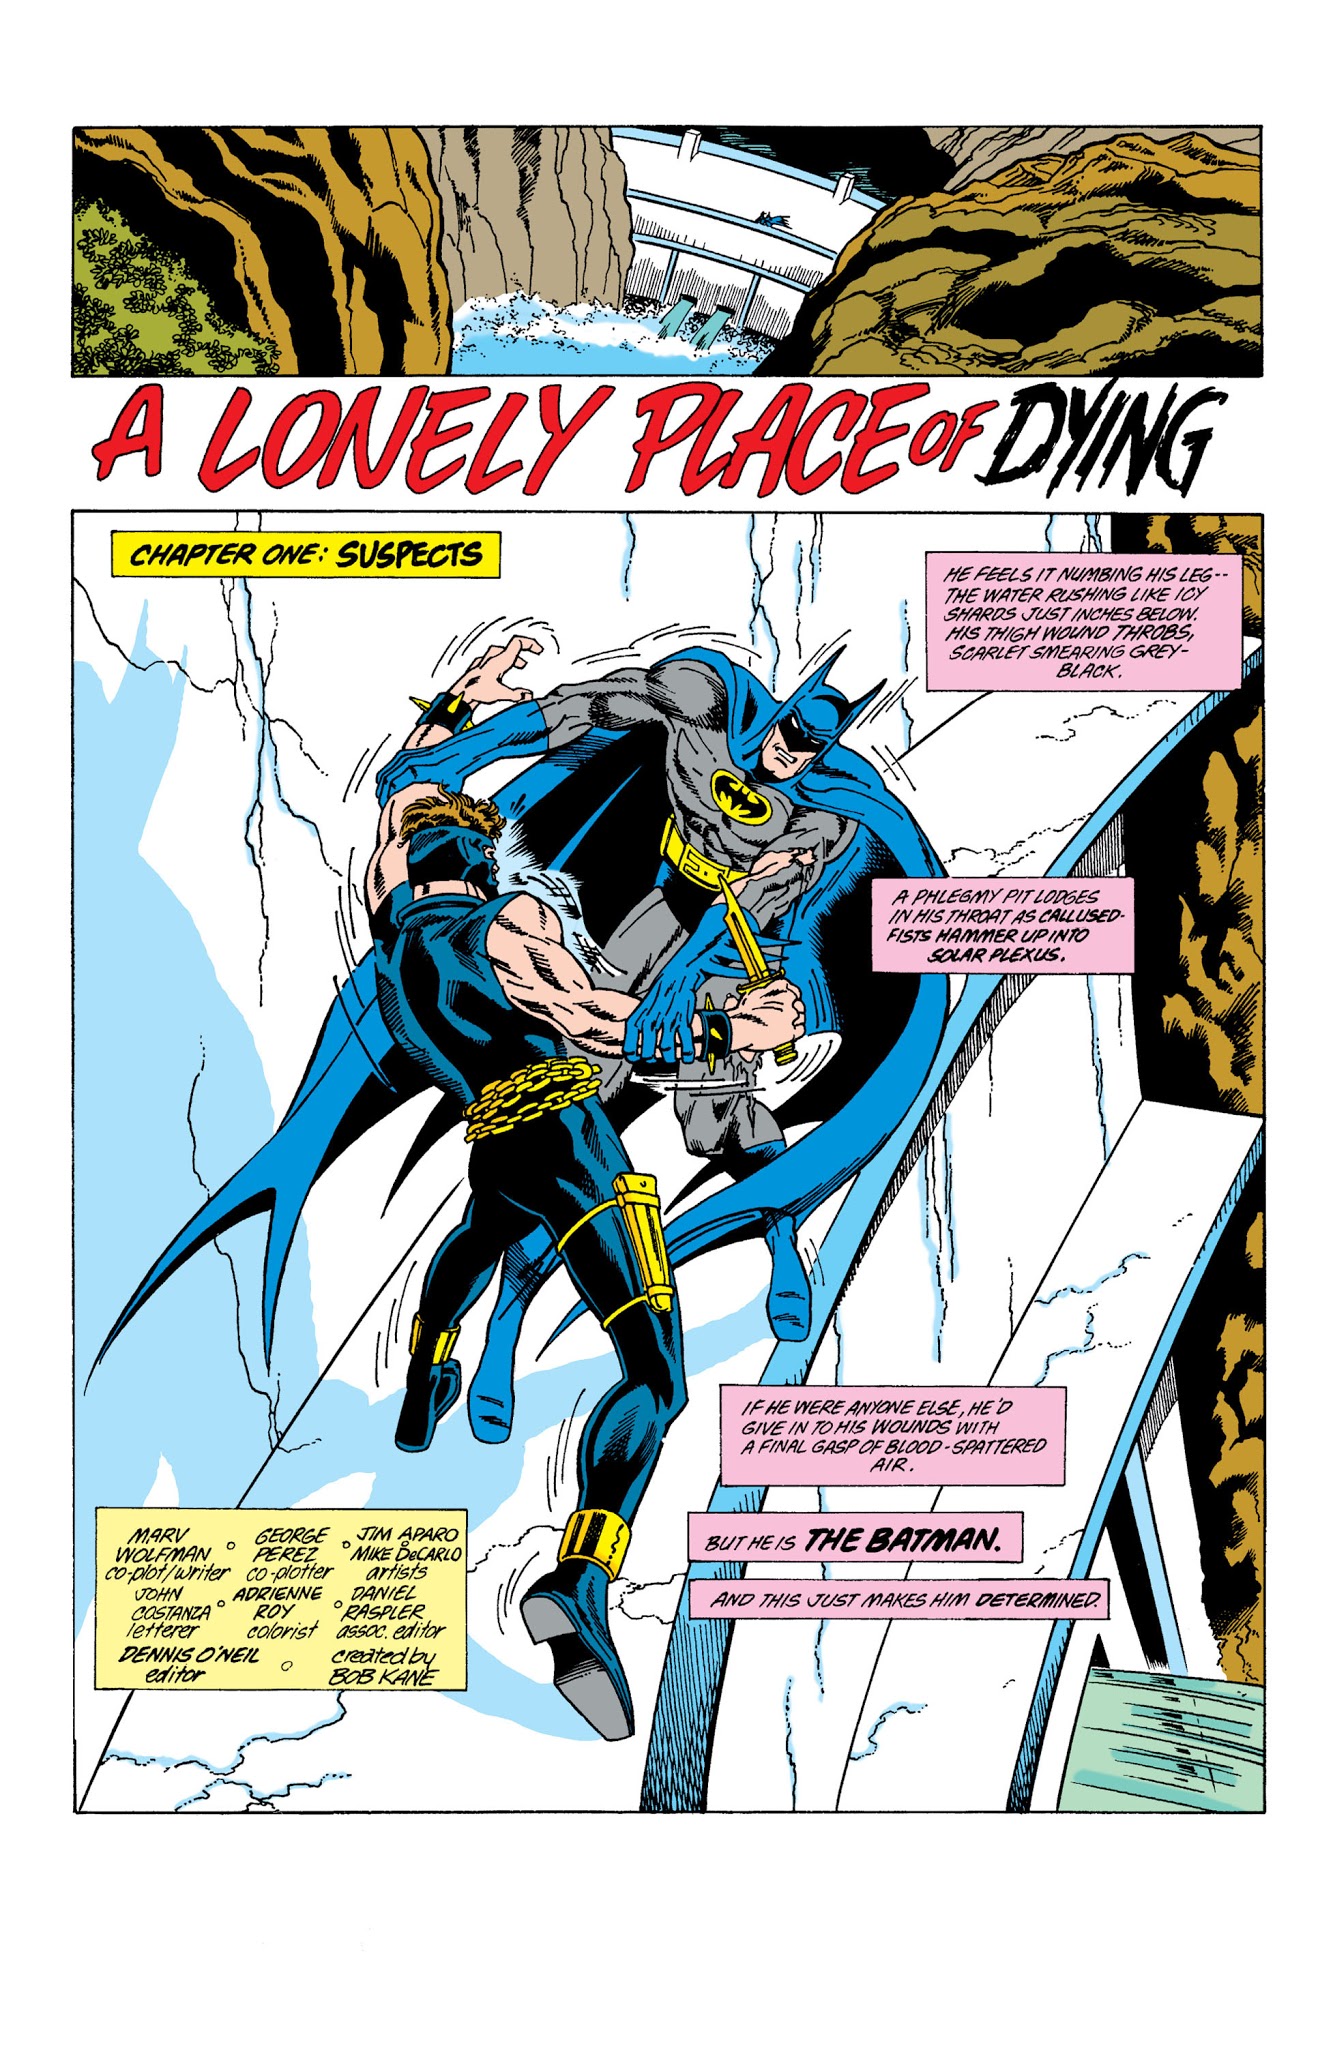 Read online Batman: A Lonely Place of Dying comic -  Issue # TPB - 2